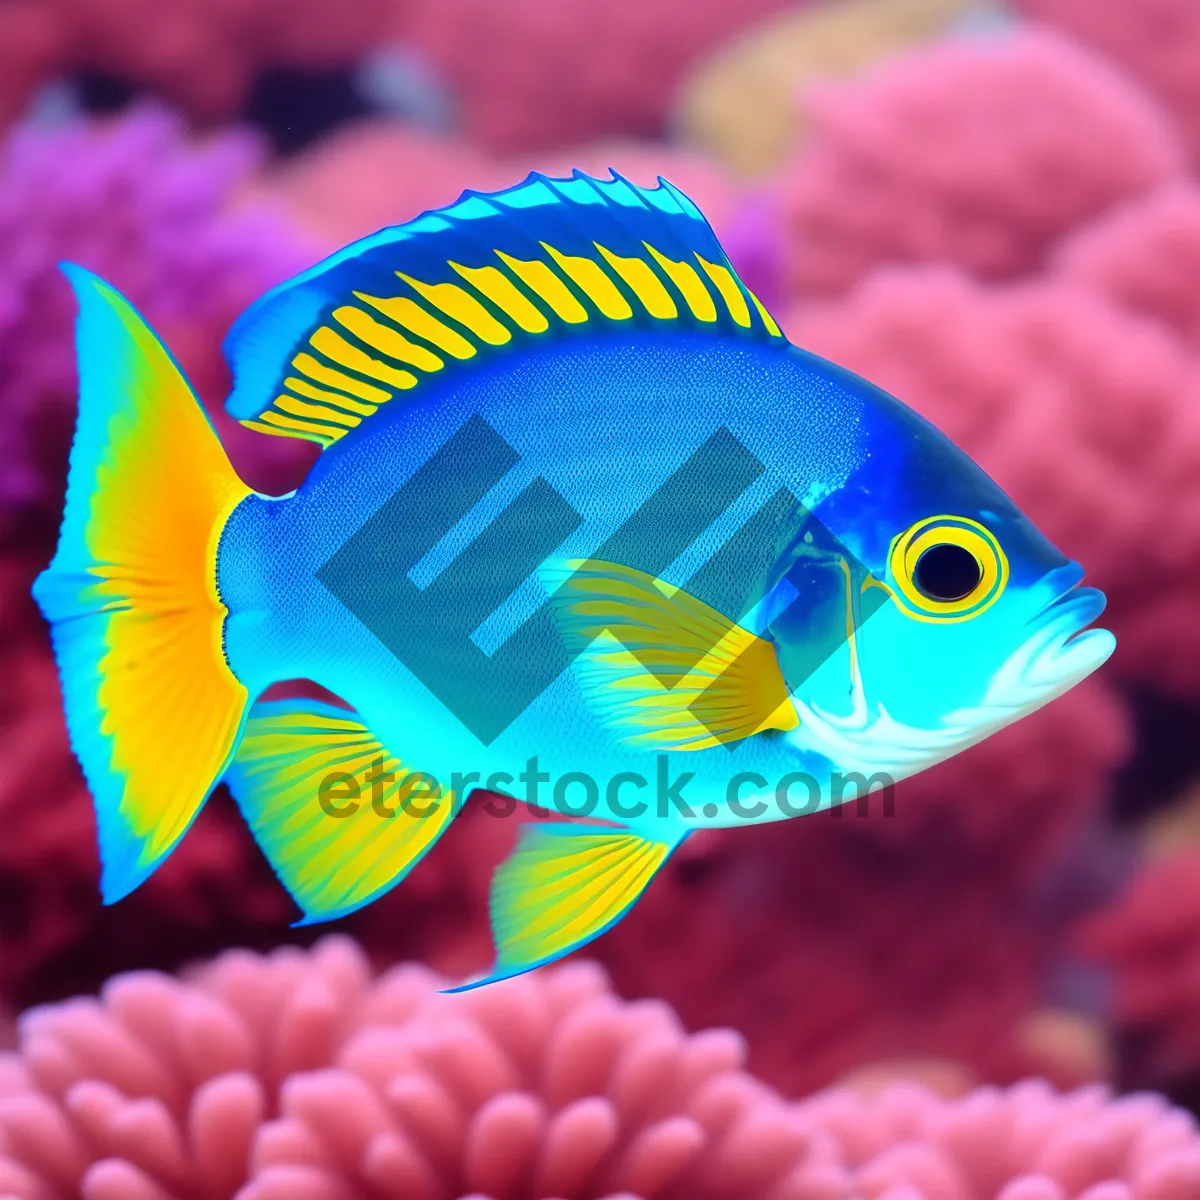 Picture of Vibrant Marine Life in Colorful Coral Reef